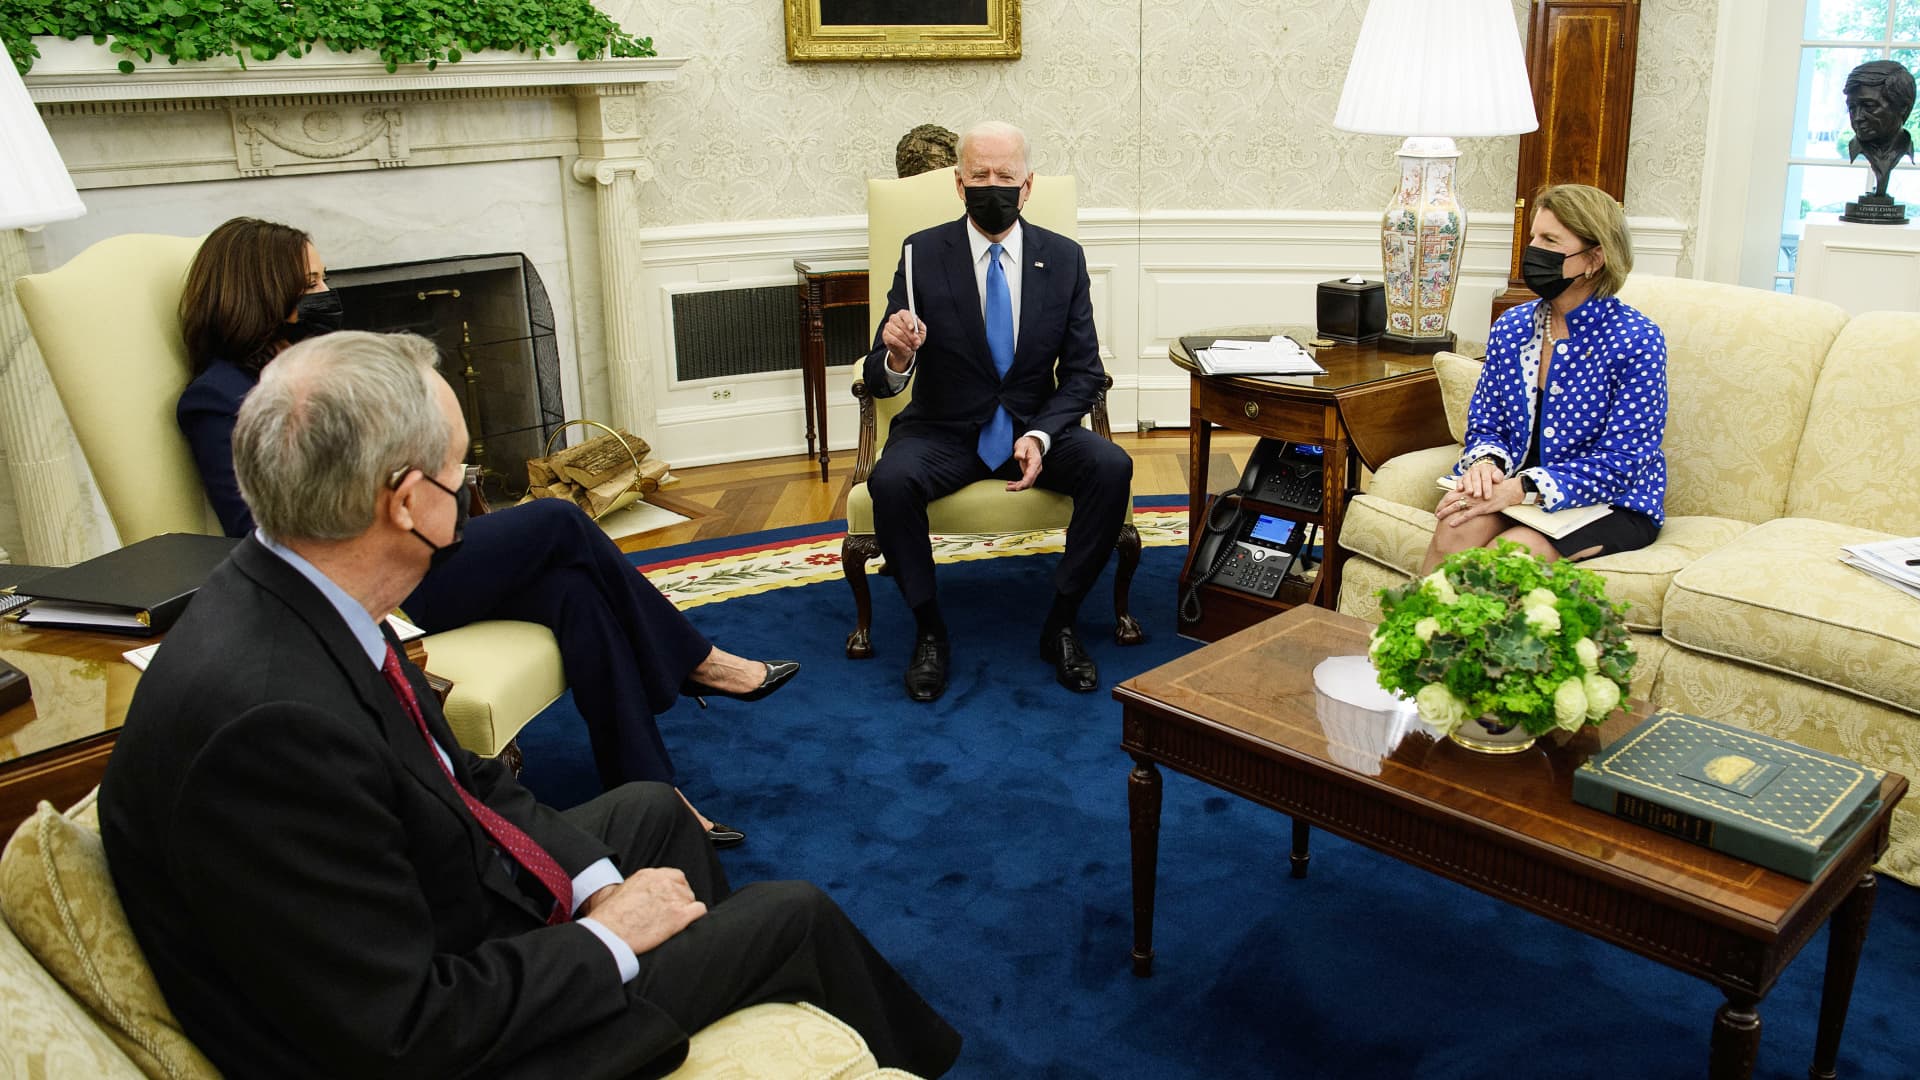 President Joe Biden(C) and Vice President Kamala Harris(L) meet with Republican Senator from West Virginia Shelley Moore Capito (R) and Republican Senator Mike Crapo of Idaho (frontL) to discuss an infrastructure bill in the Oval Office at the White House in Washington, DC, on May 13, 2021.